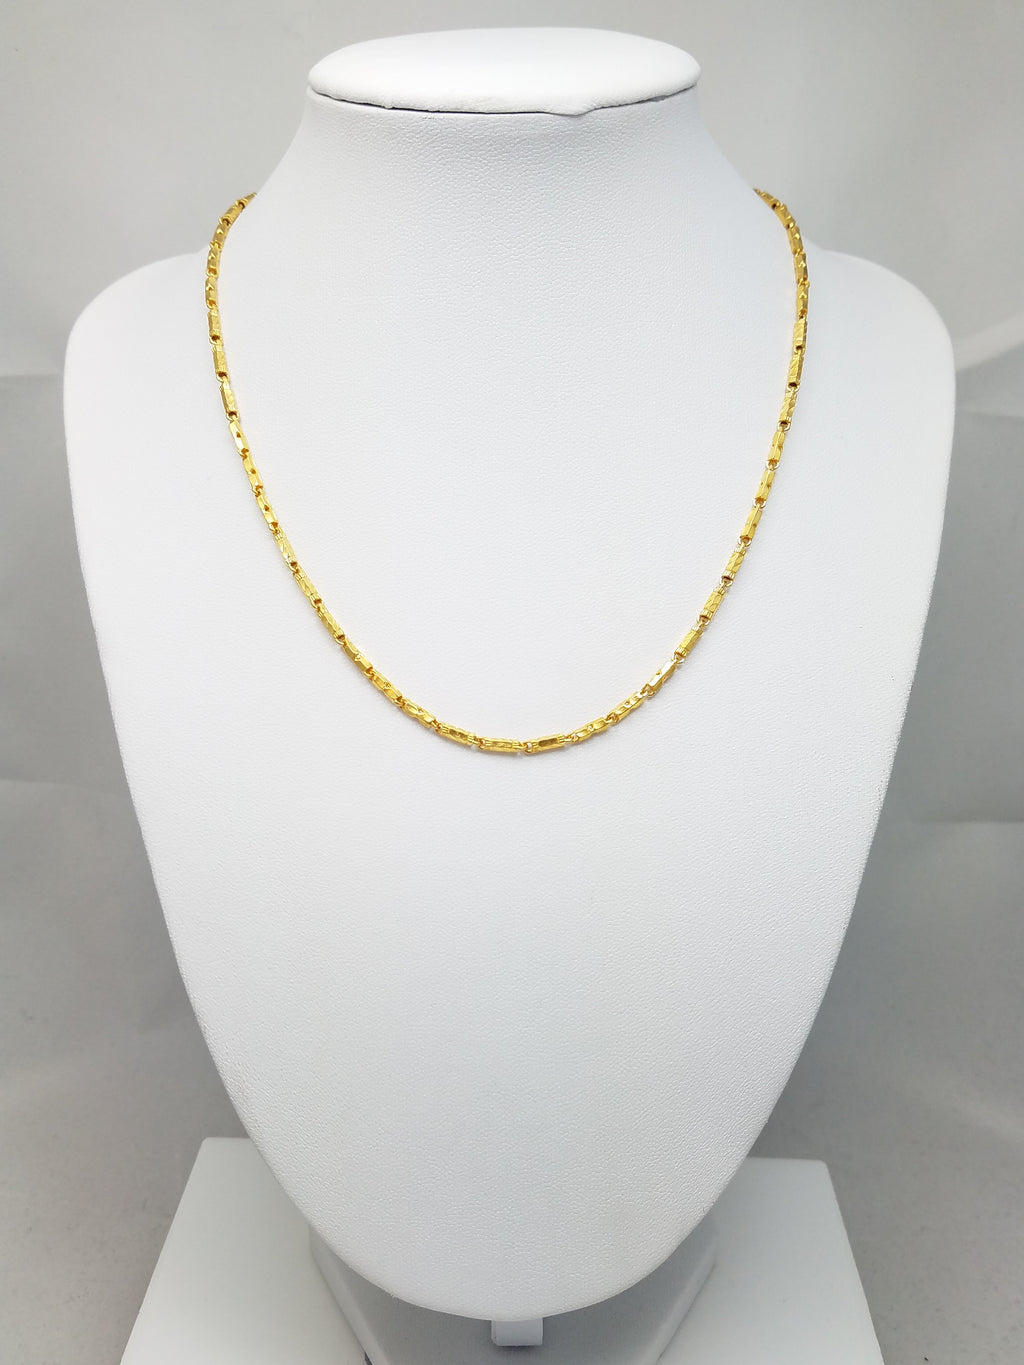 Exquisite Solid 22.9k Yellow Gold Fancy Link Chain Necklace